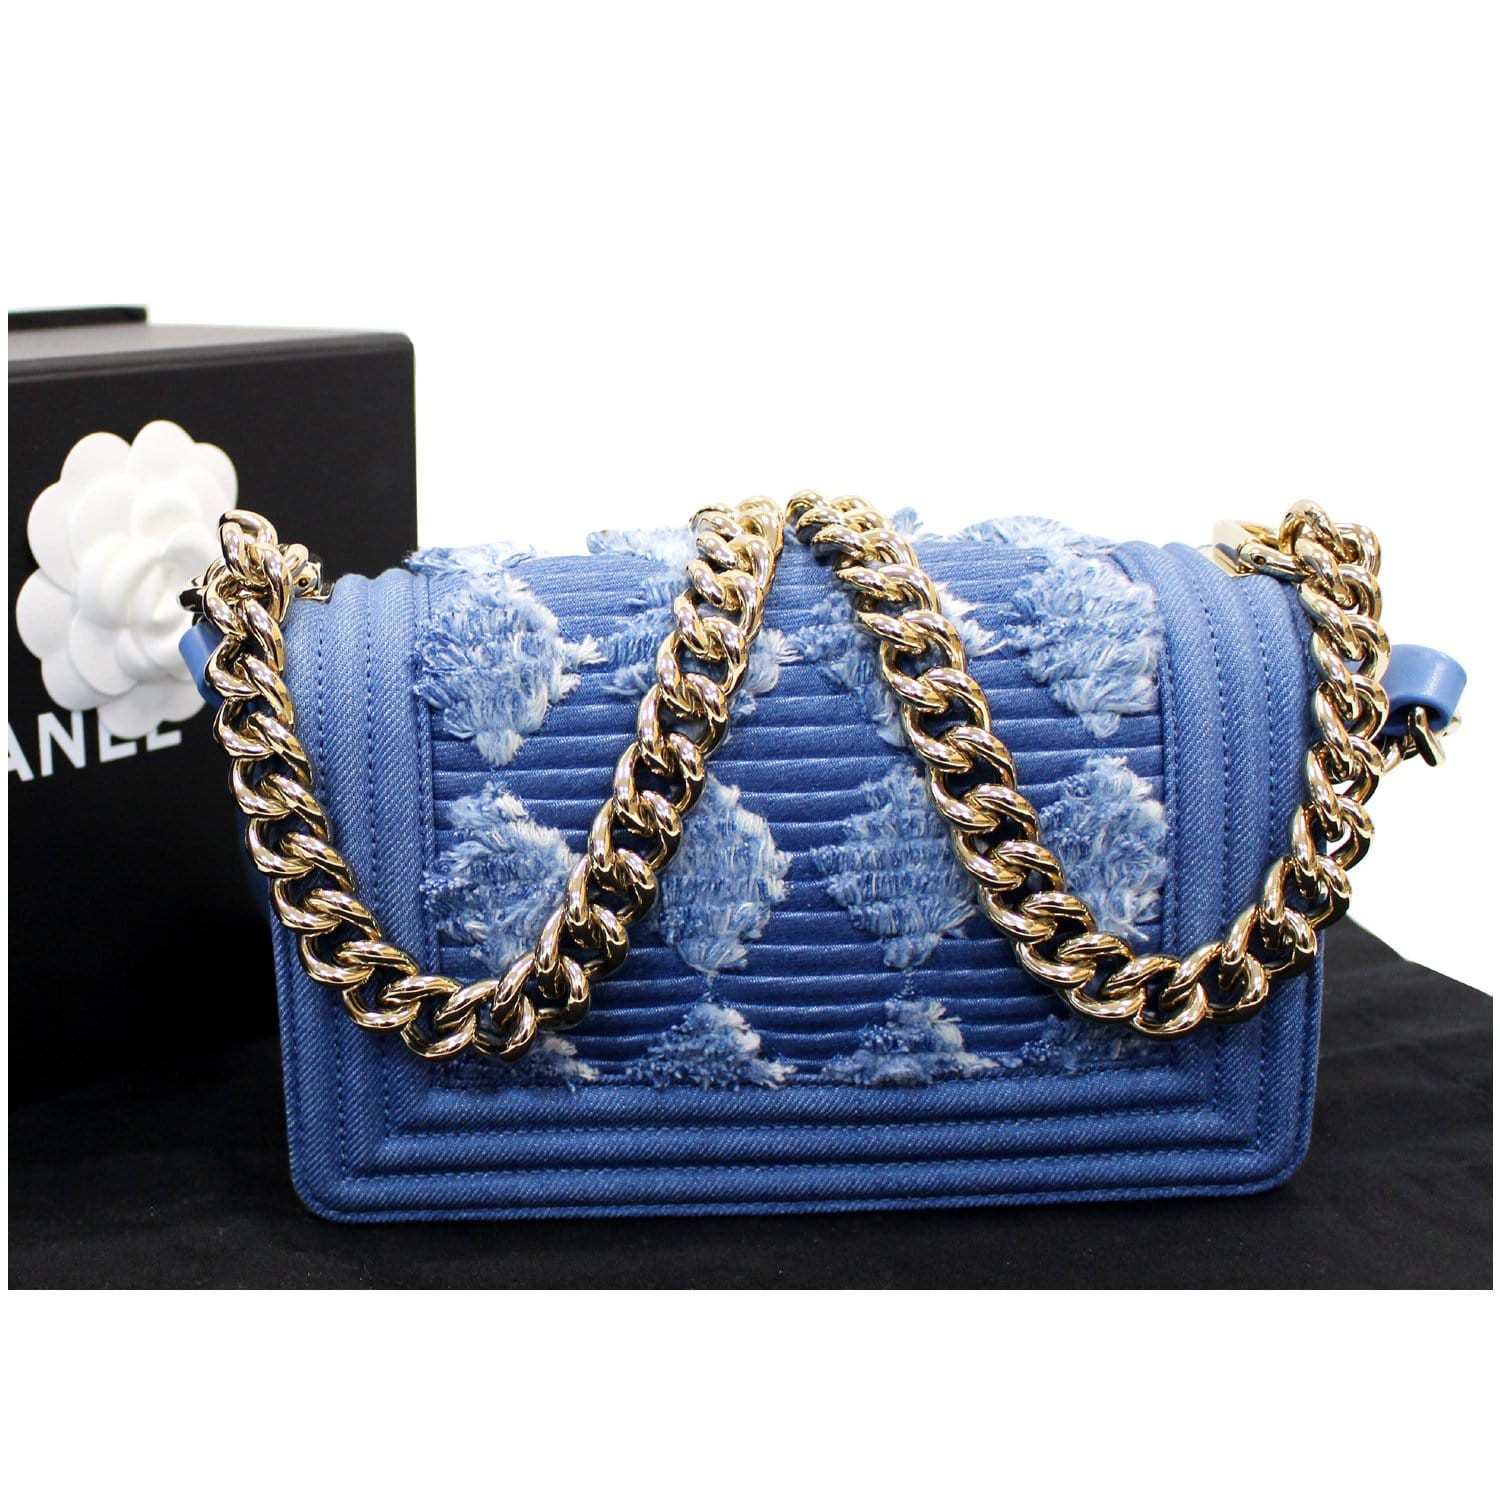 AUTHENTIC NWT/NIB CHANEL Small Label Click Flap Bag Style code